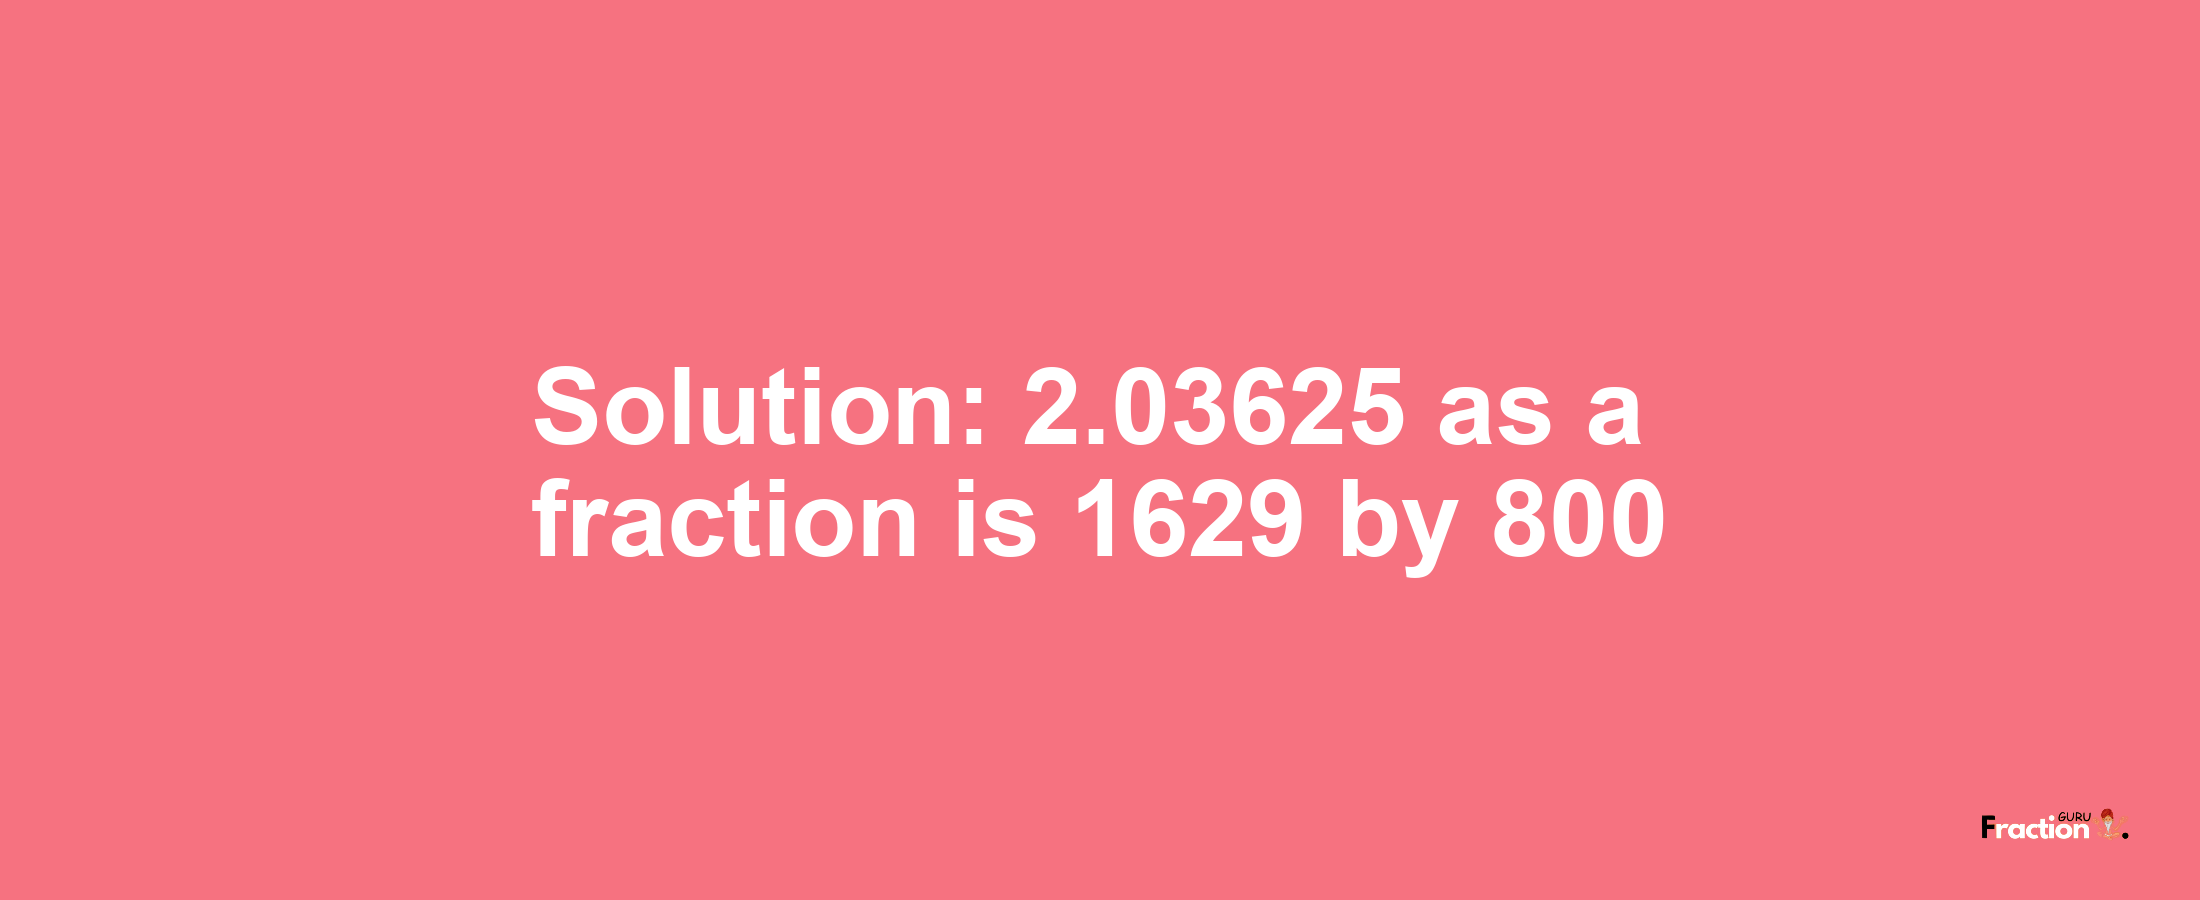 Solution:2.03625 as a fraction is 1629/800